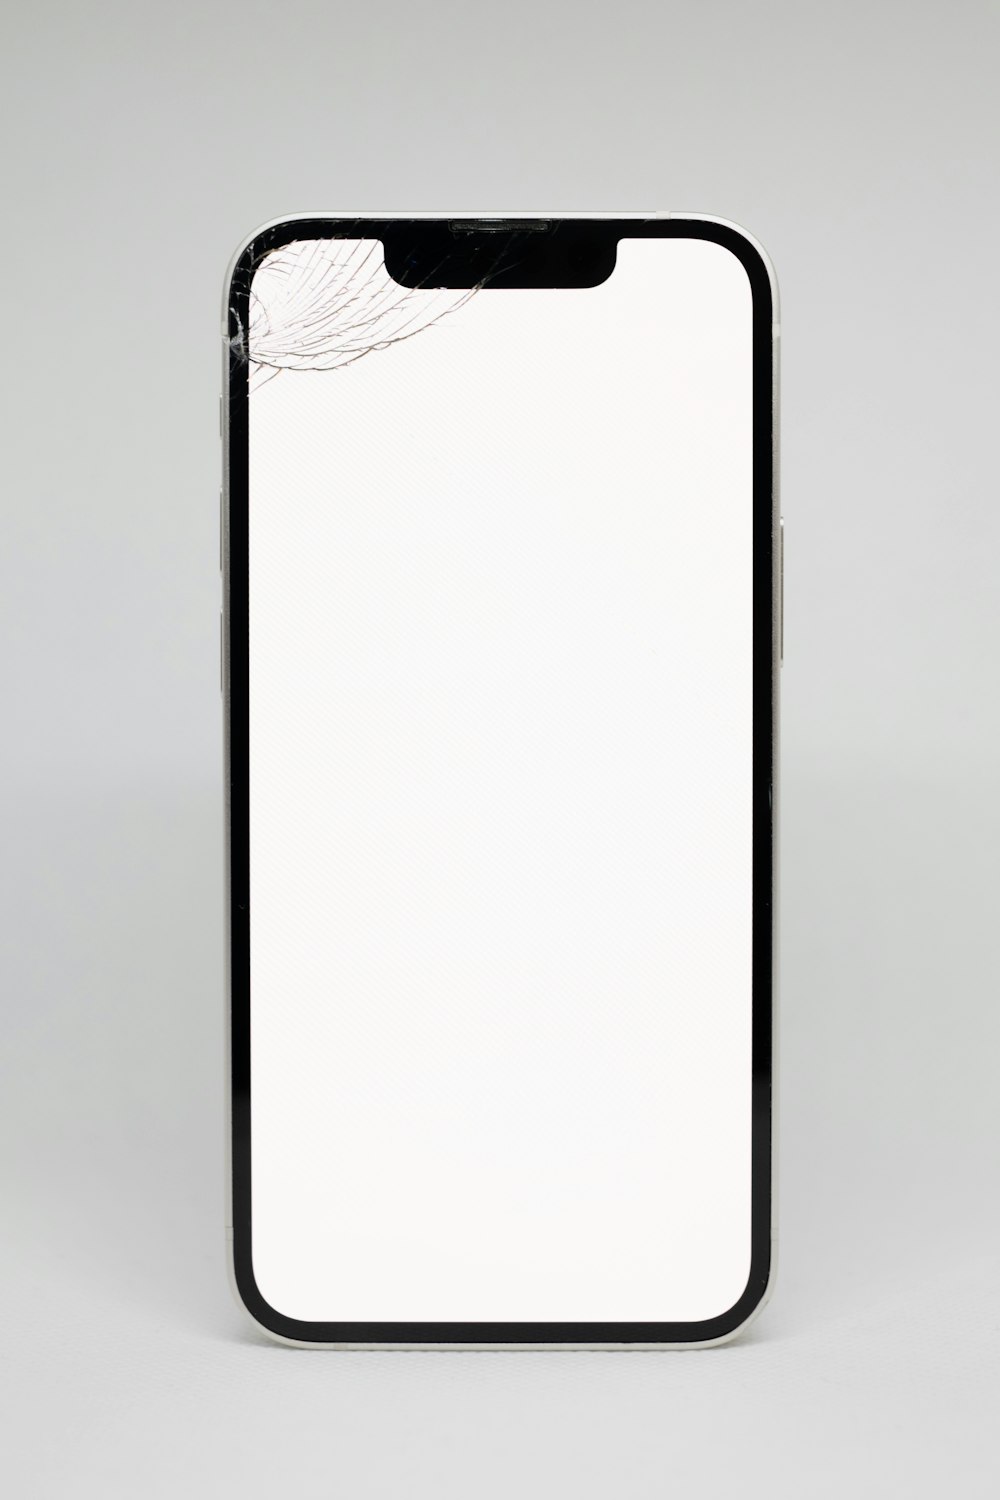 a cell phone with a broken screen on a white background